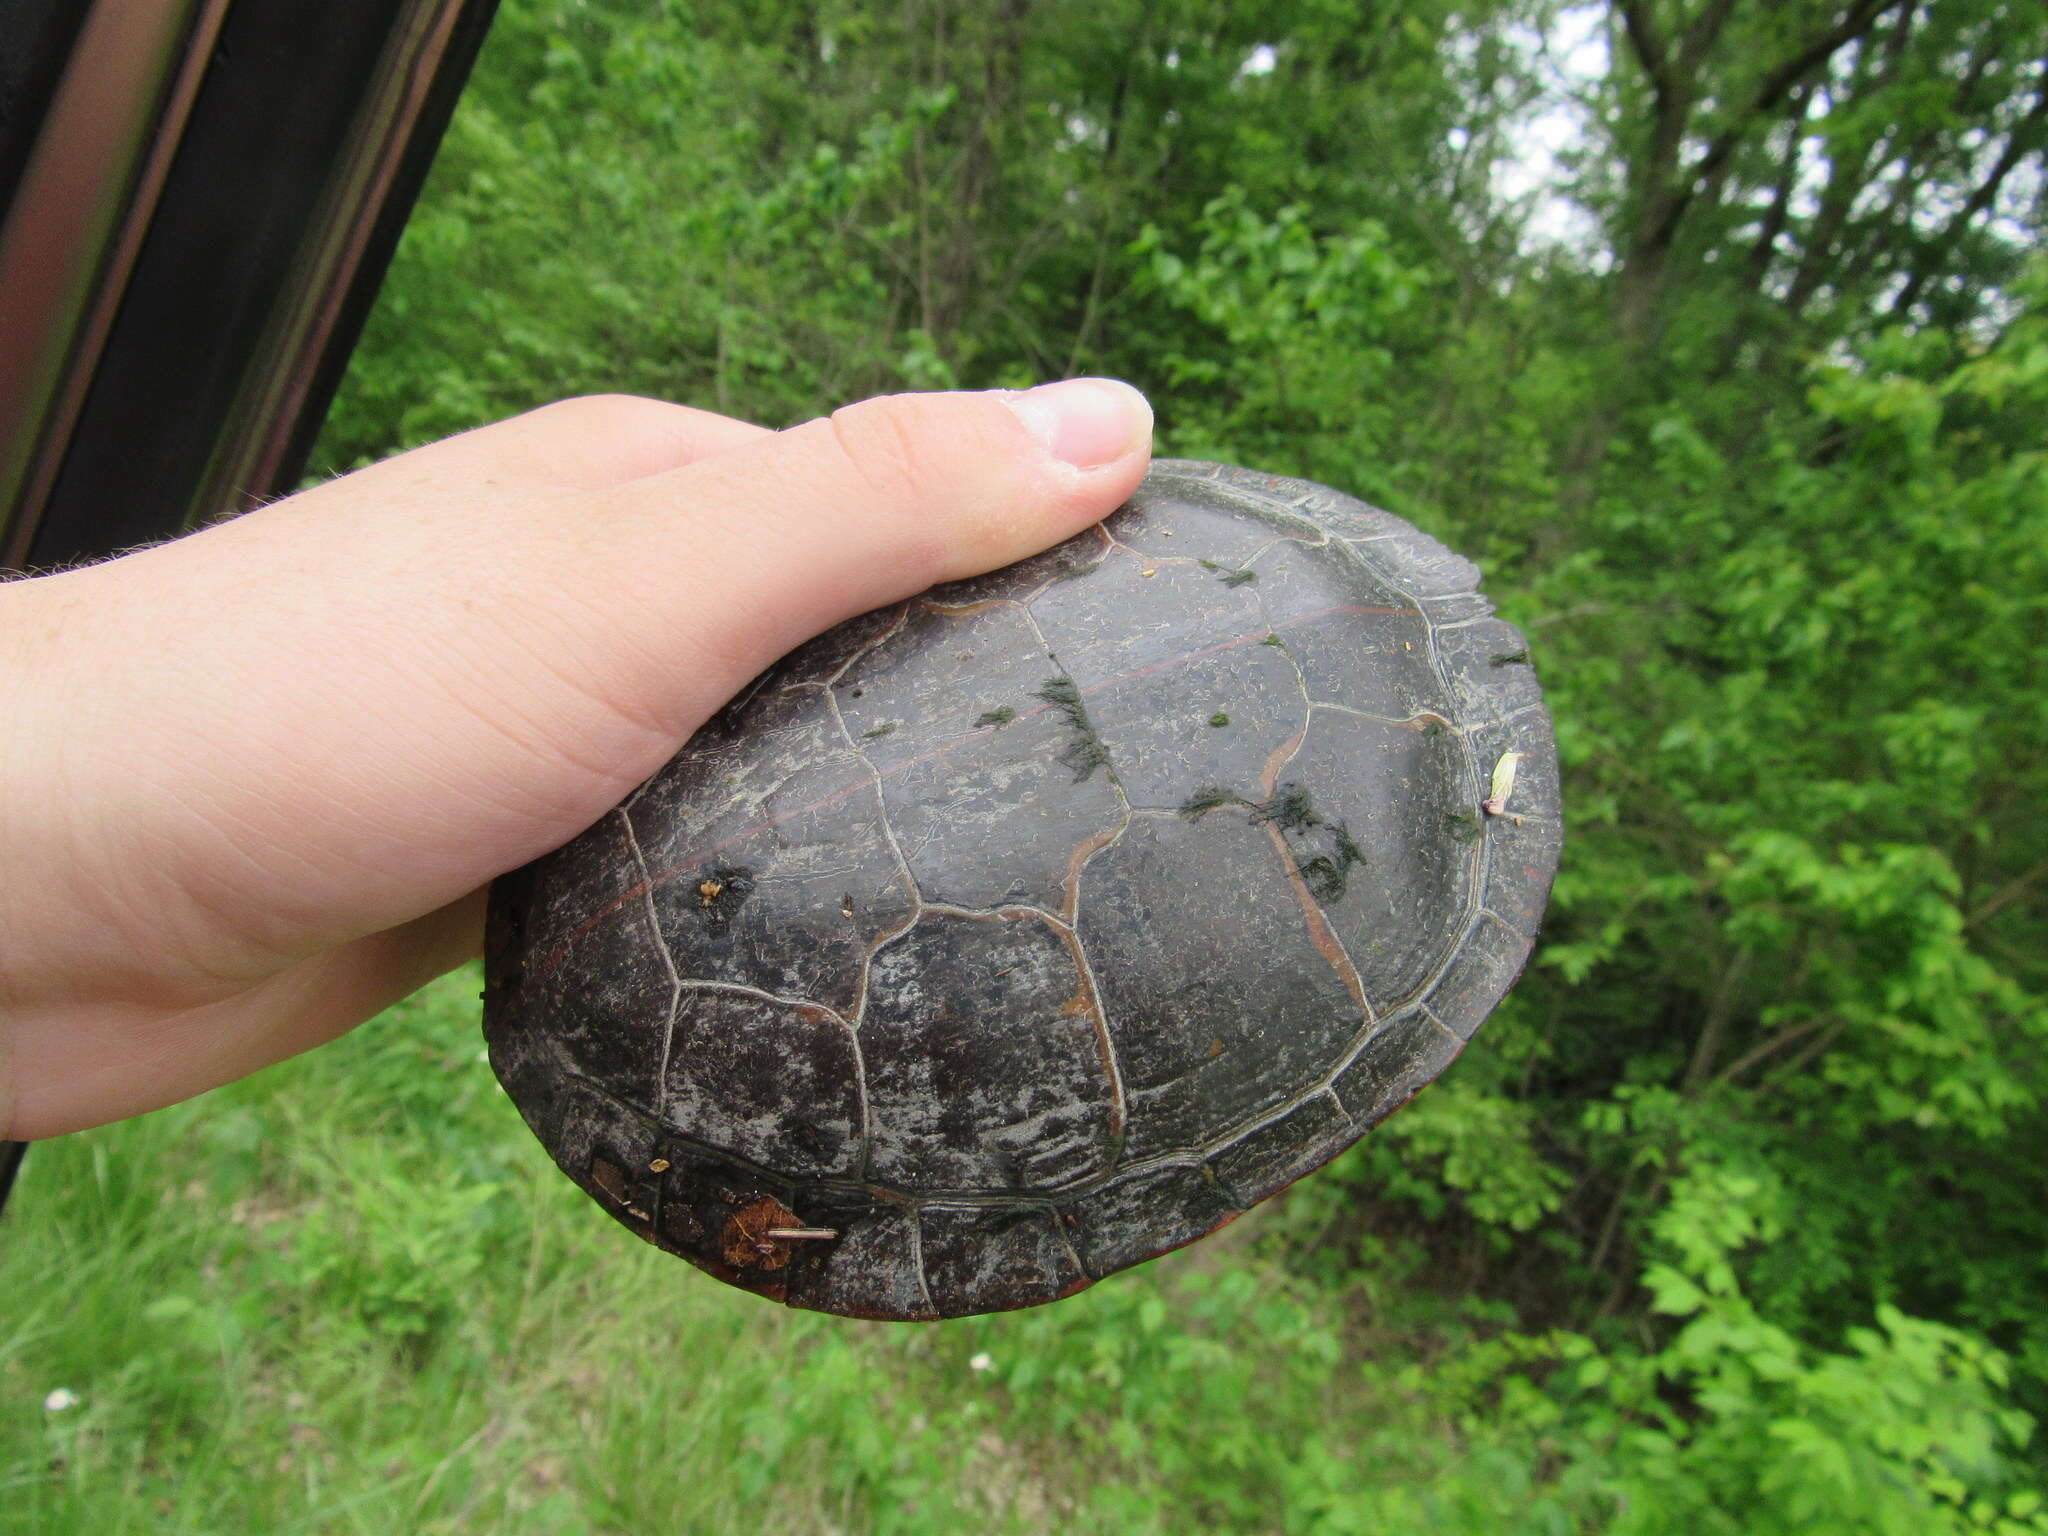 Image of Southern painted turtle